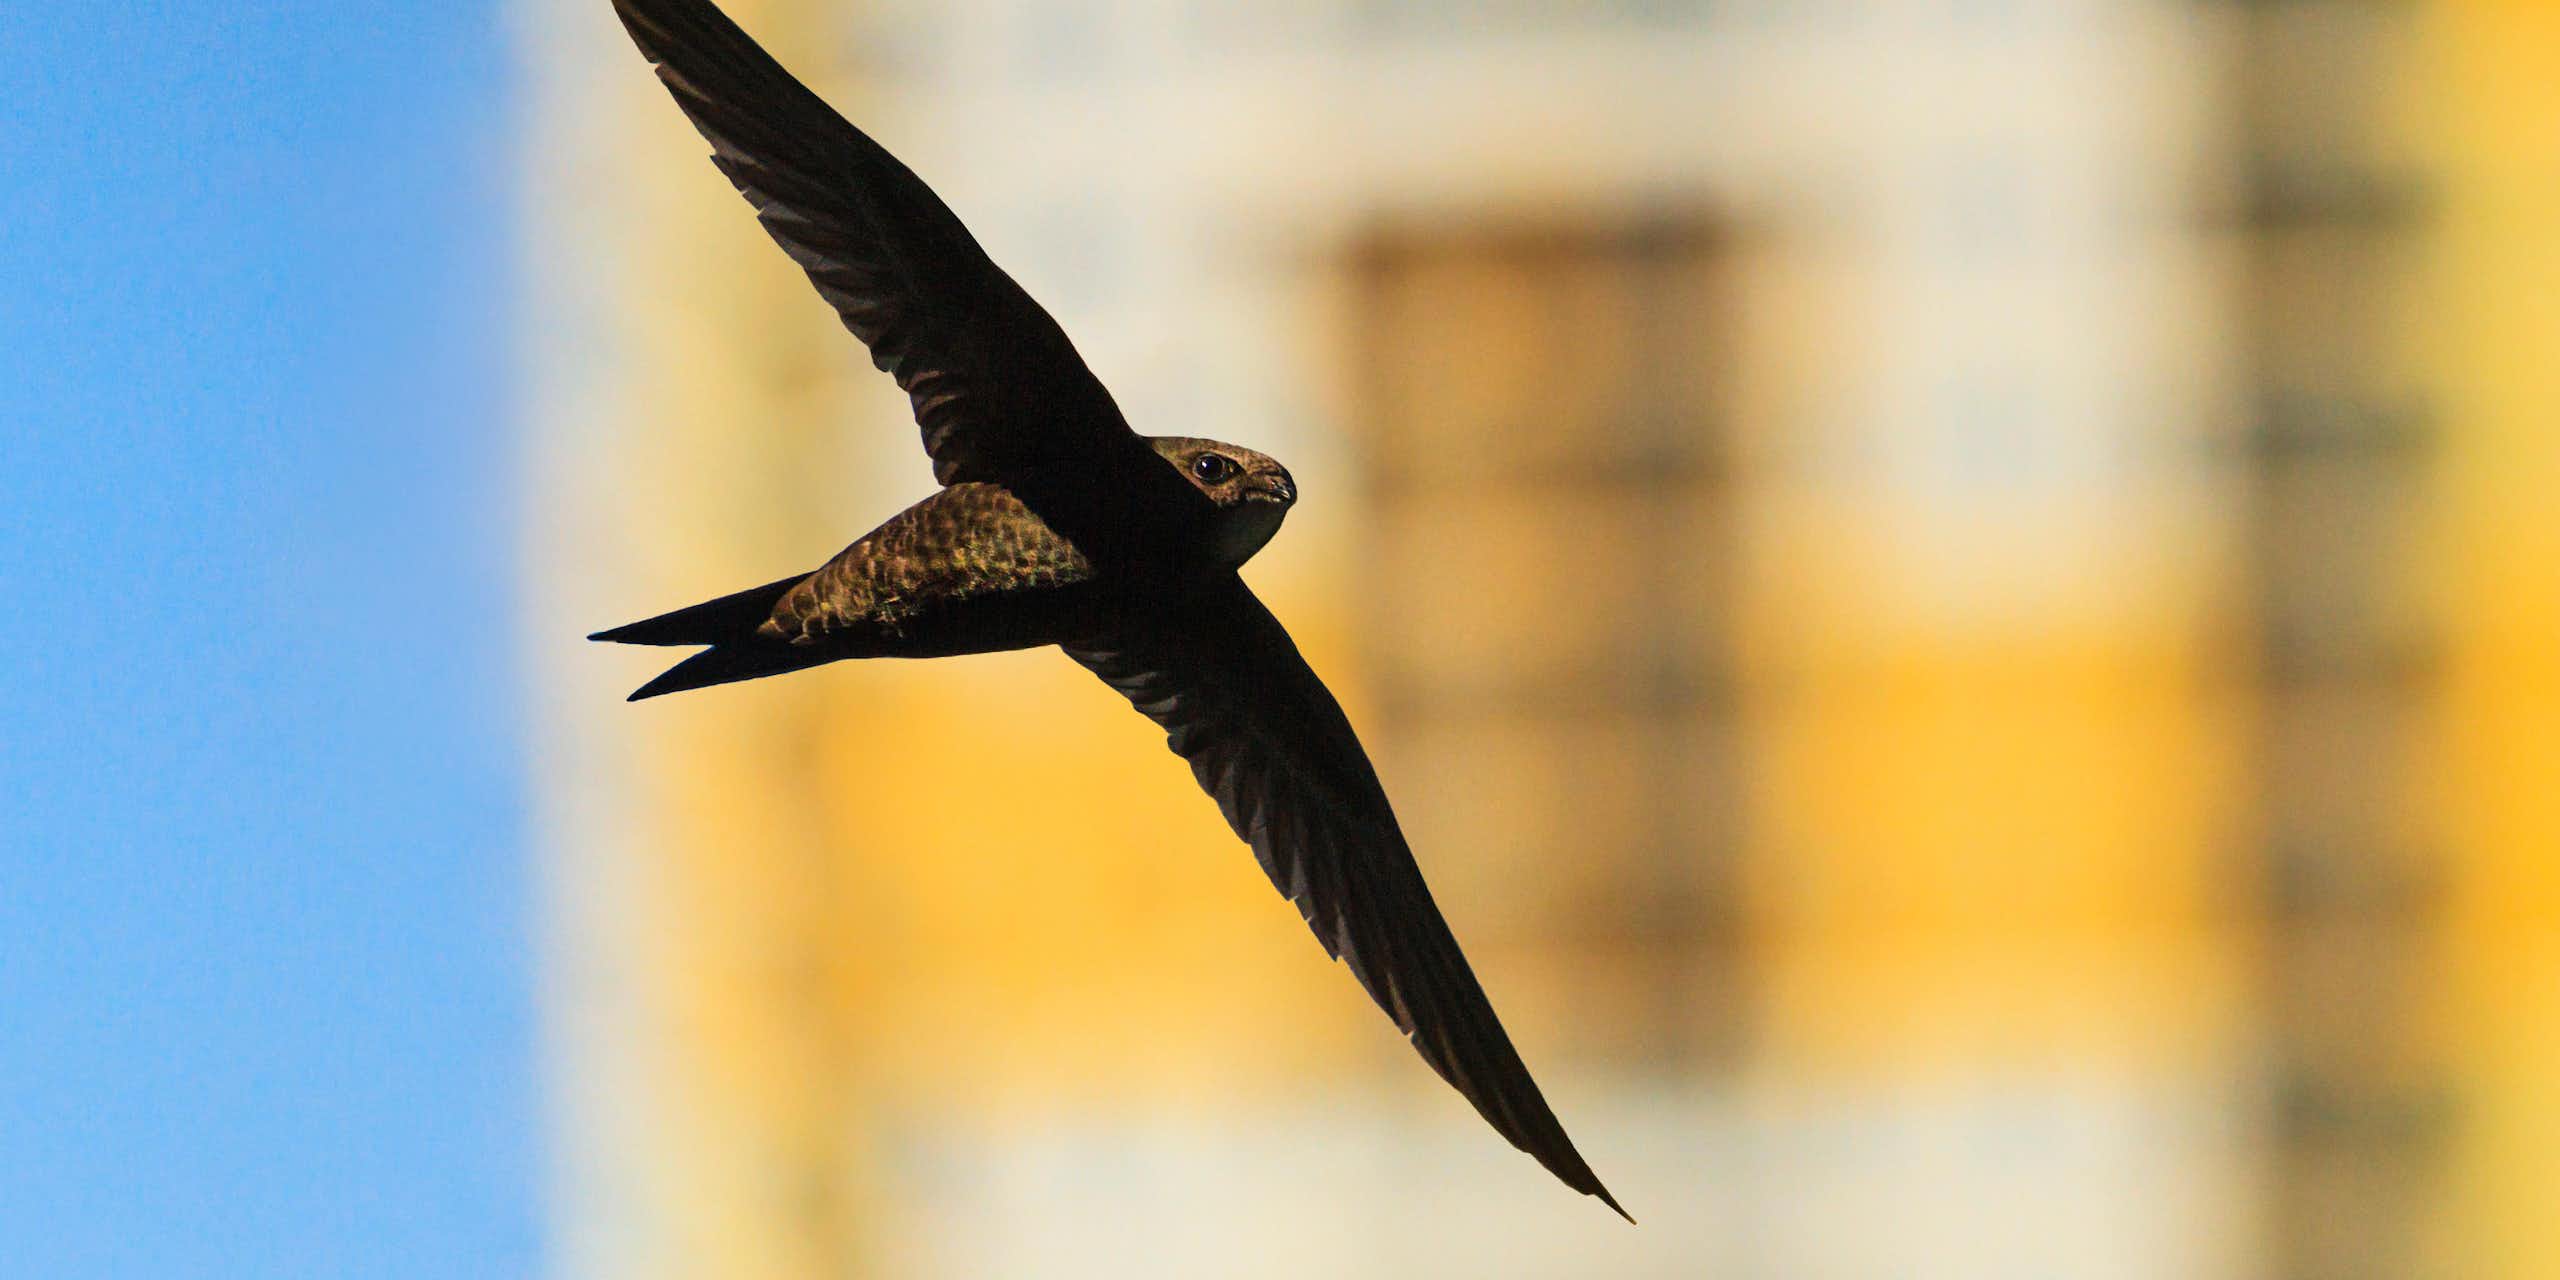 A swift in flight with a tower block out of focus behind it.